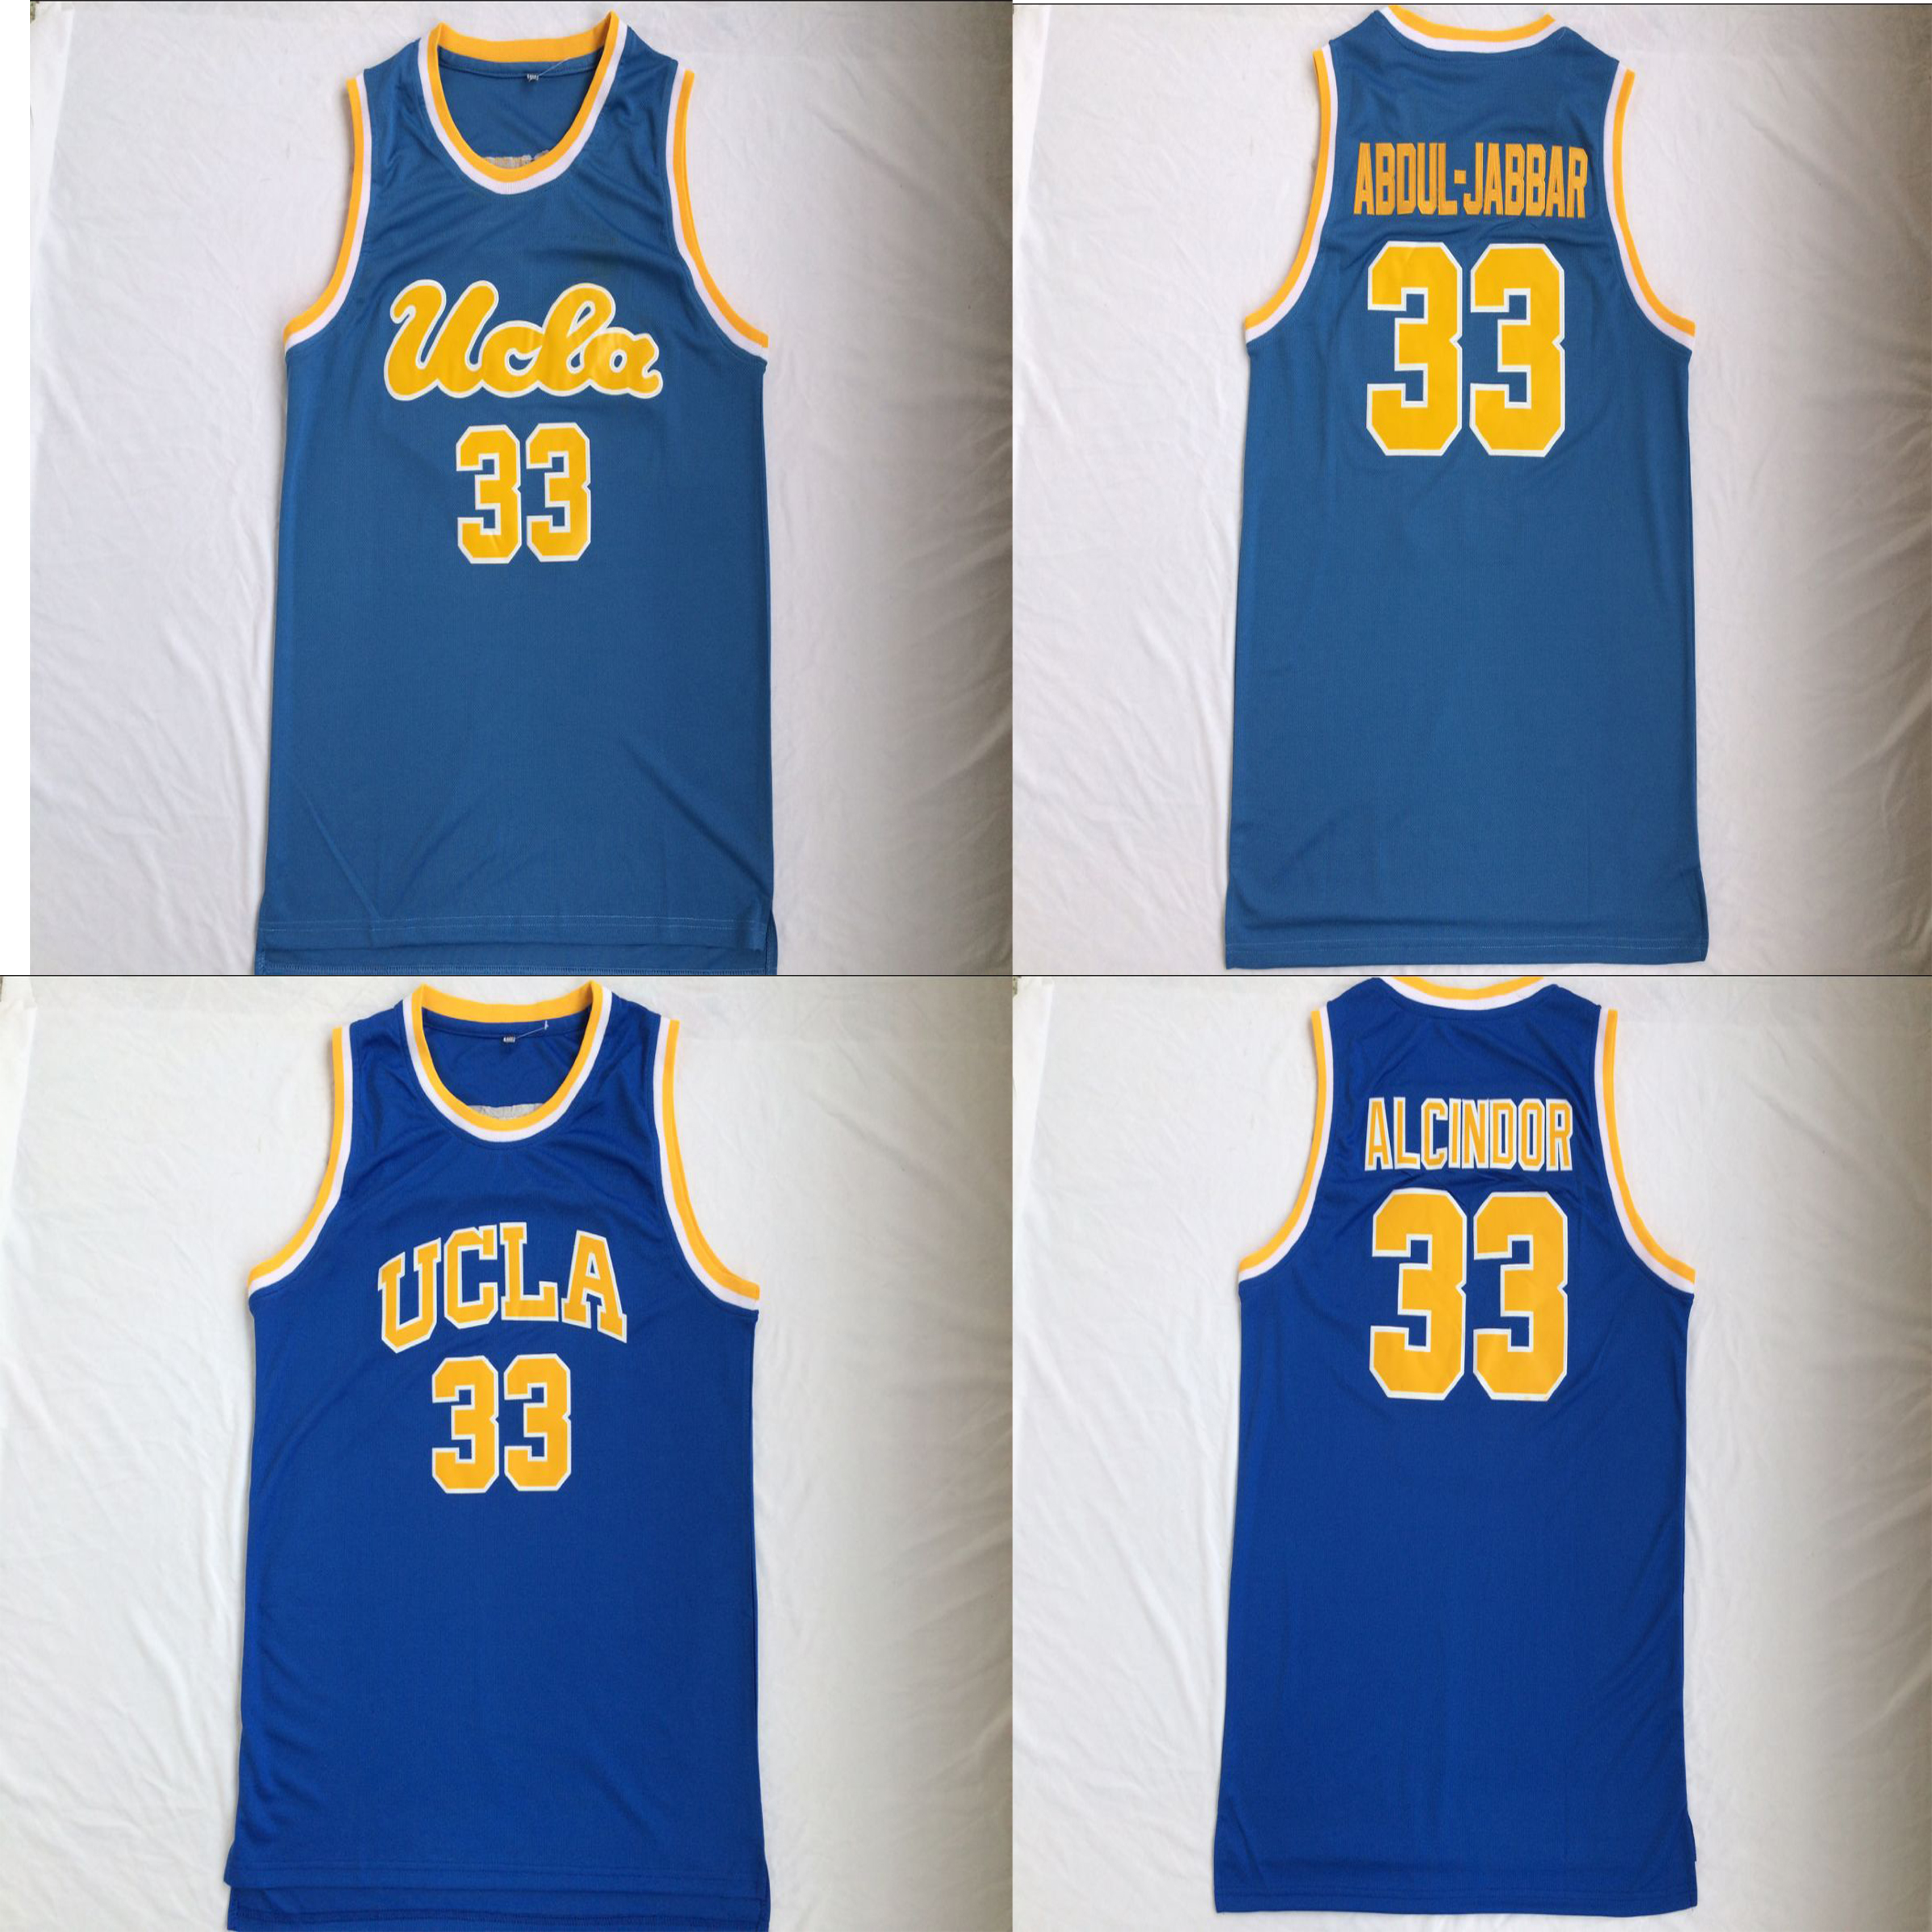 

New Arrival UCLA Bruins 33 Lew Alcindor Jersey 33 Abdul Jabbar 100% Stitched Basketball Sport High Quality Fast Shipping, As show